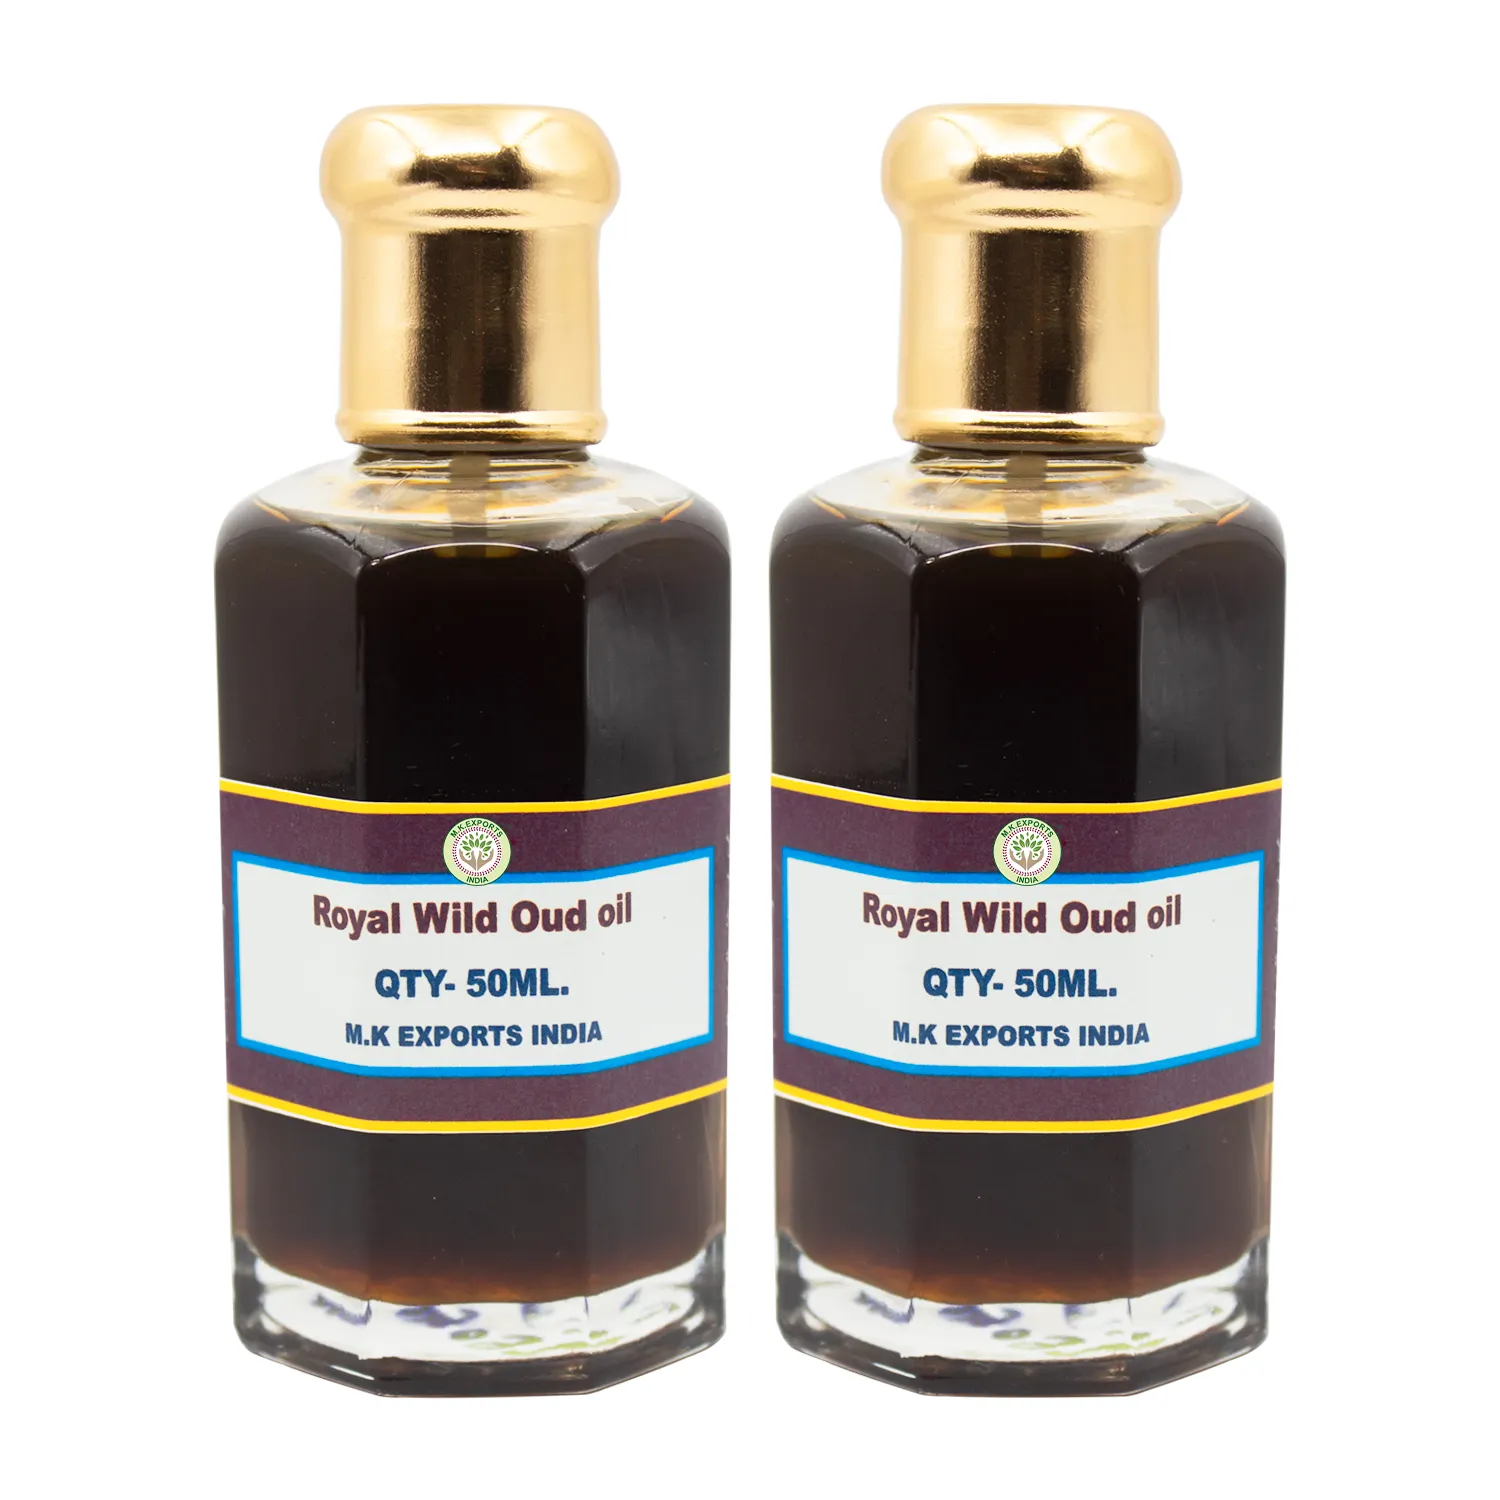 High Quality Pure Indian Agarwood Oil Steam Distilled Oud Essence in 30ml and 100ml Bottles Available at Low Price